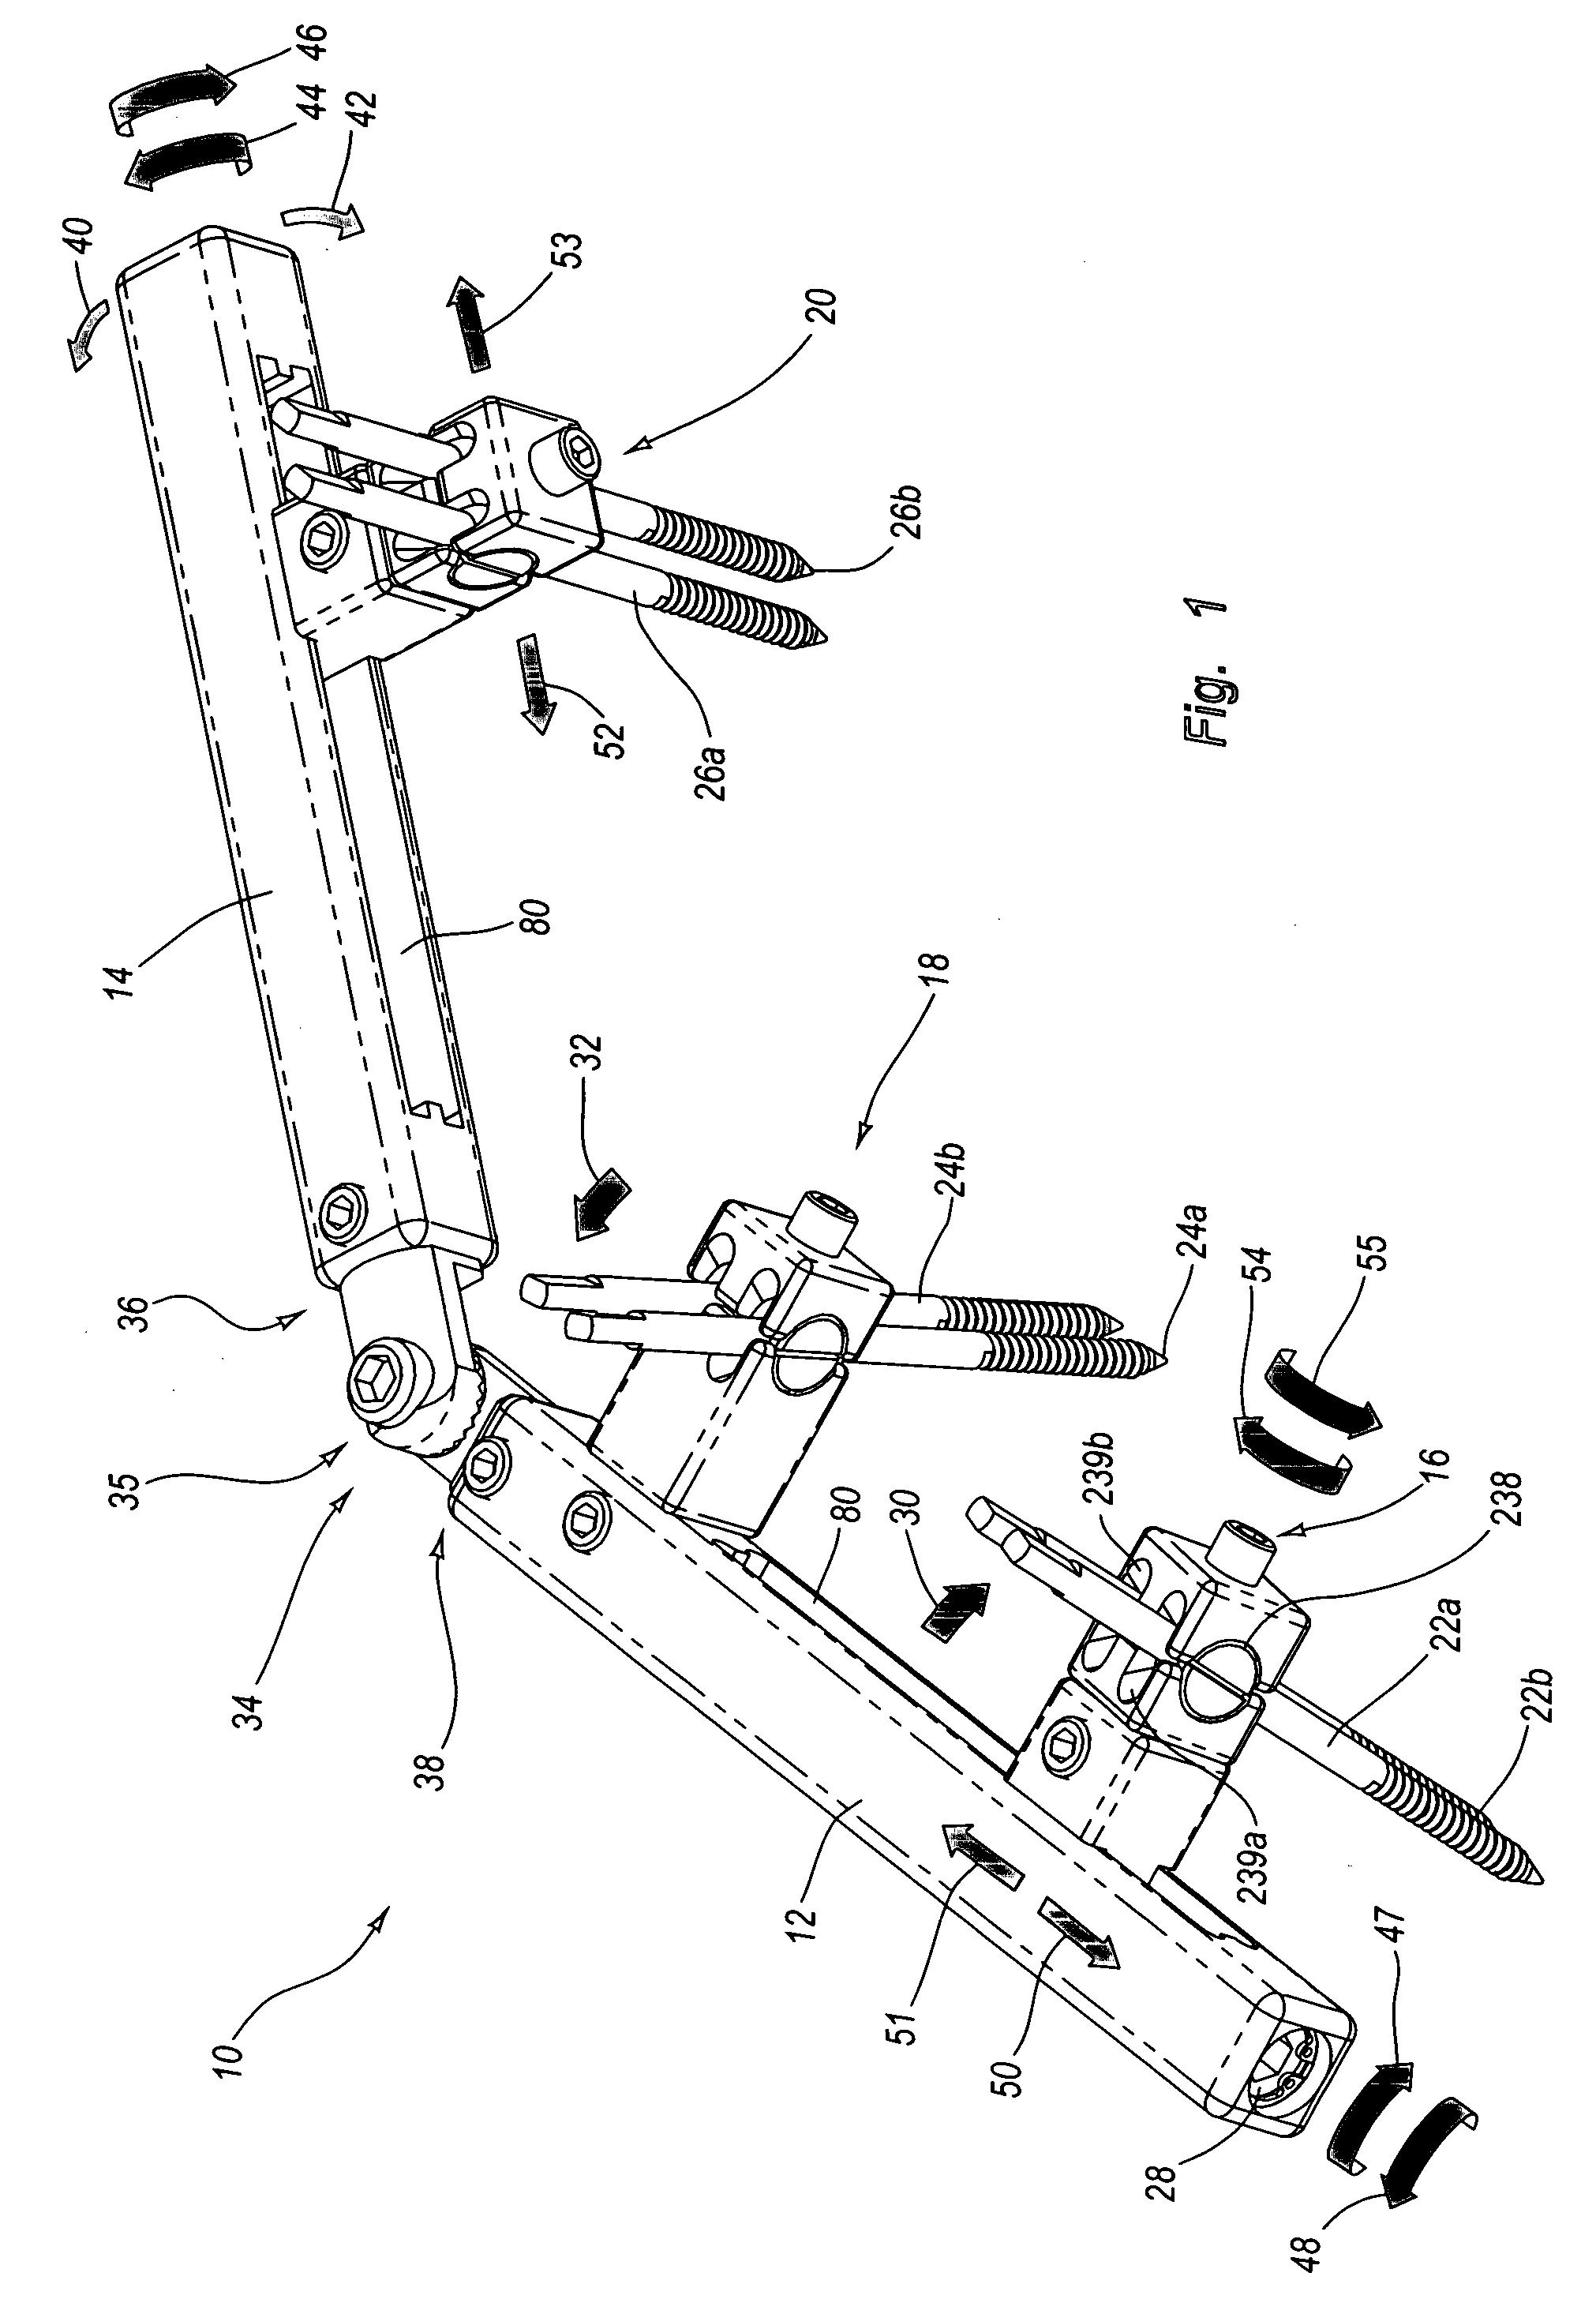 Adjustable splint for osteosynthesis